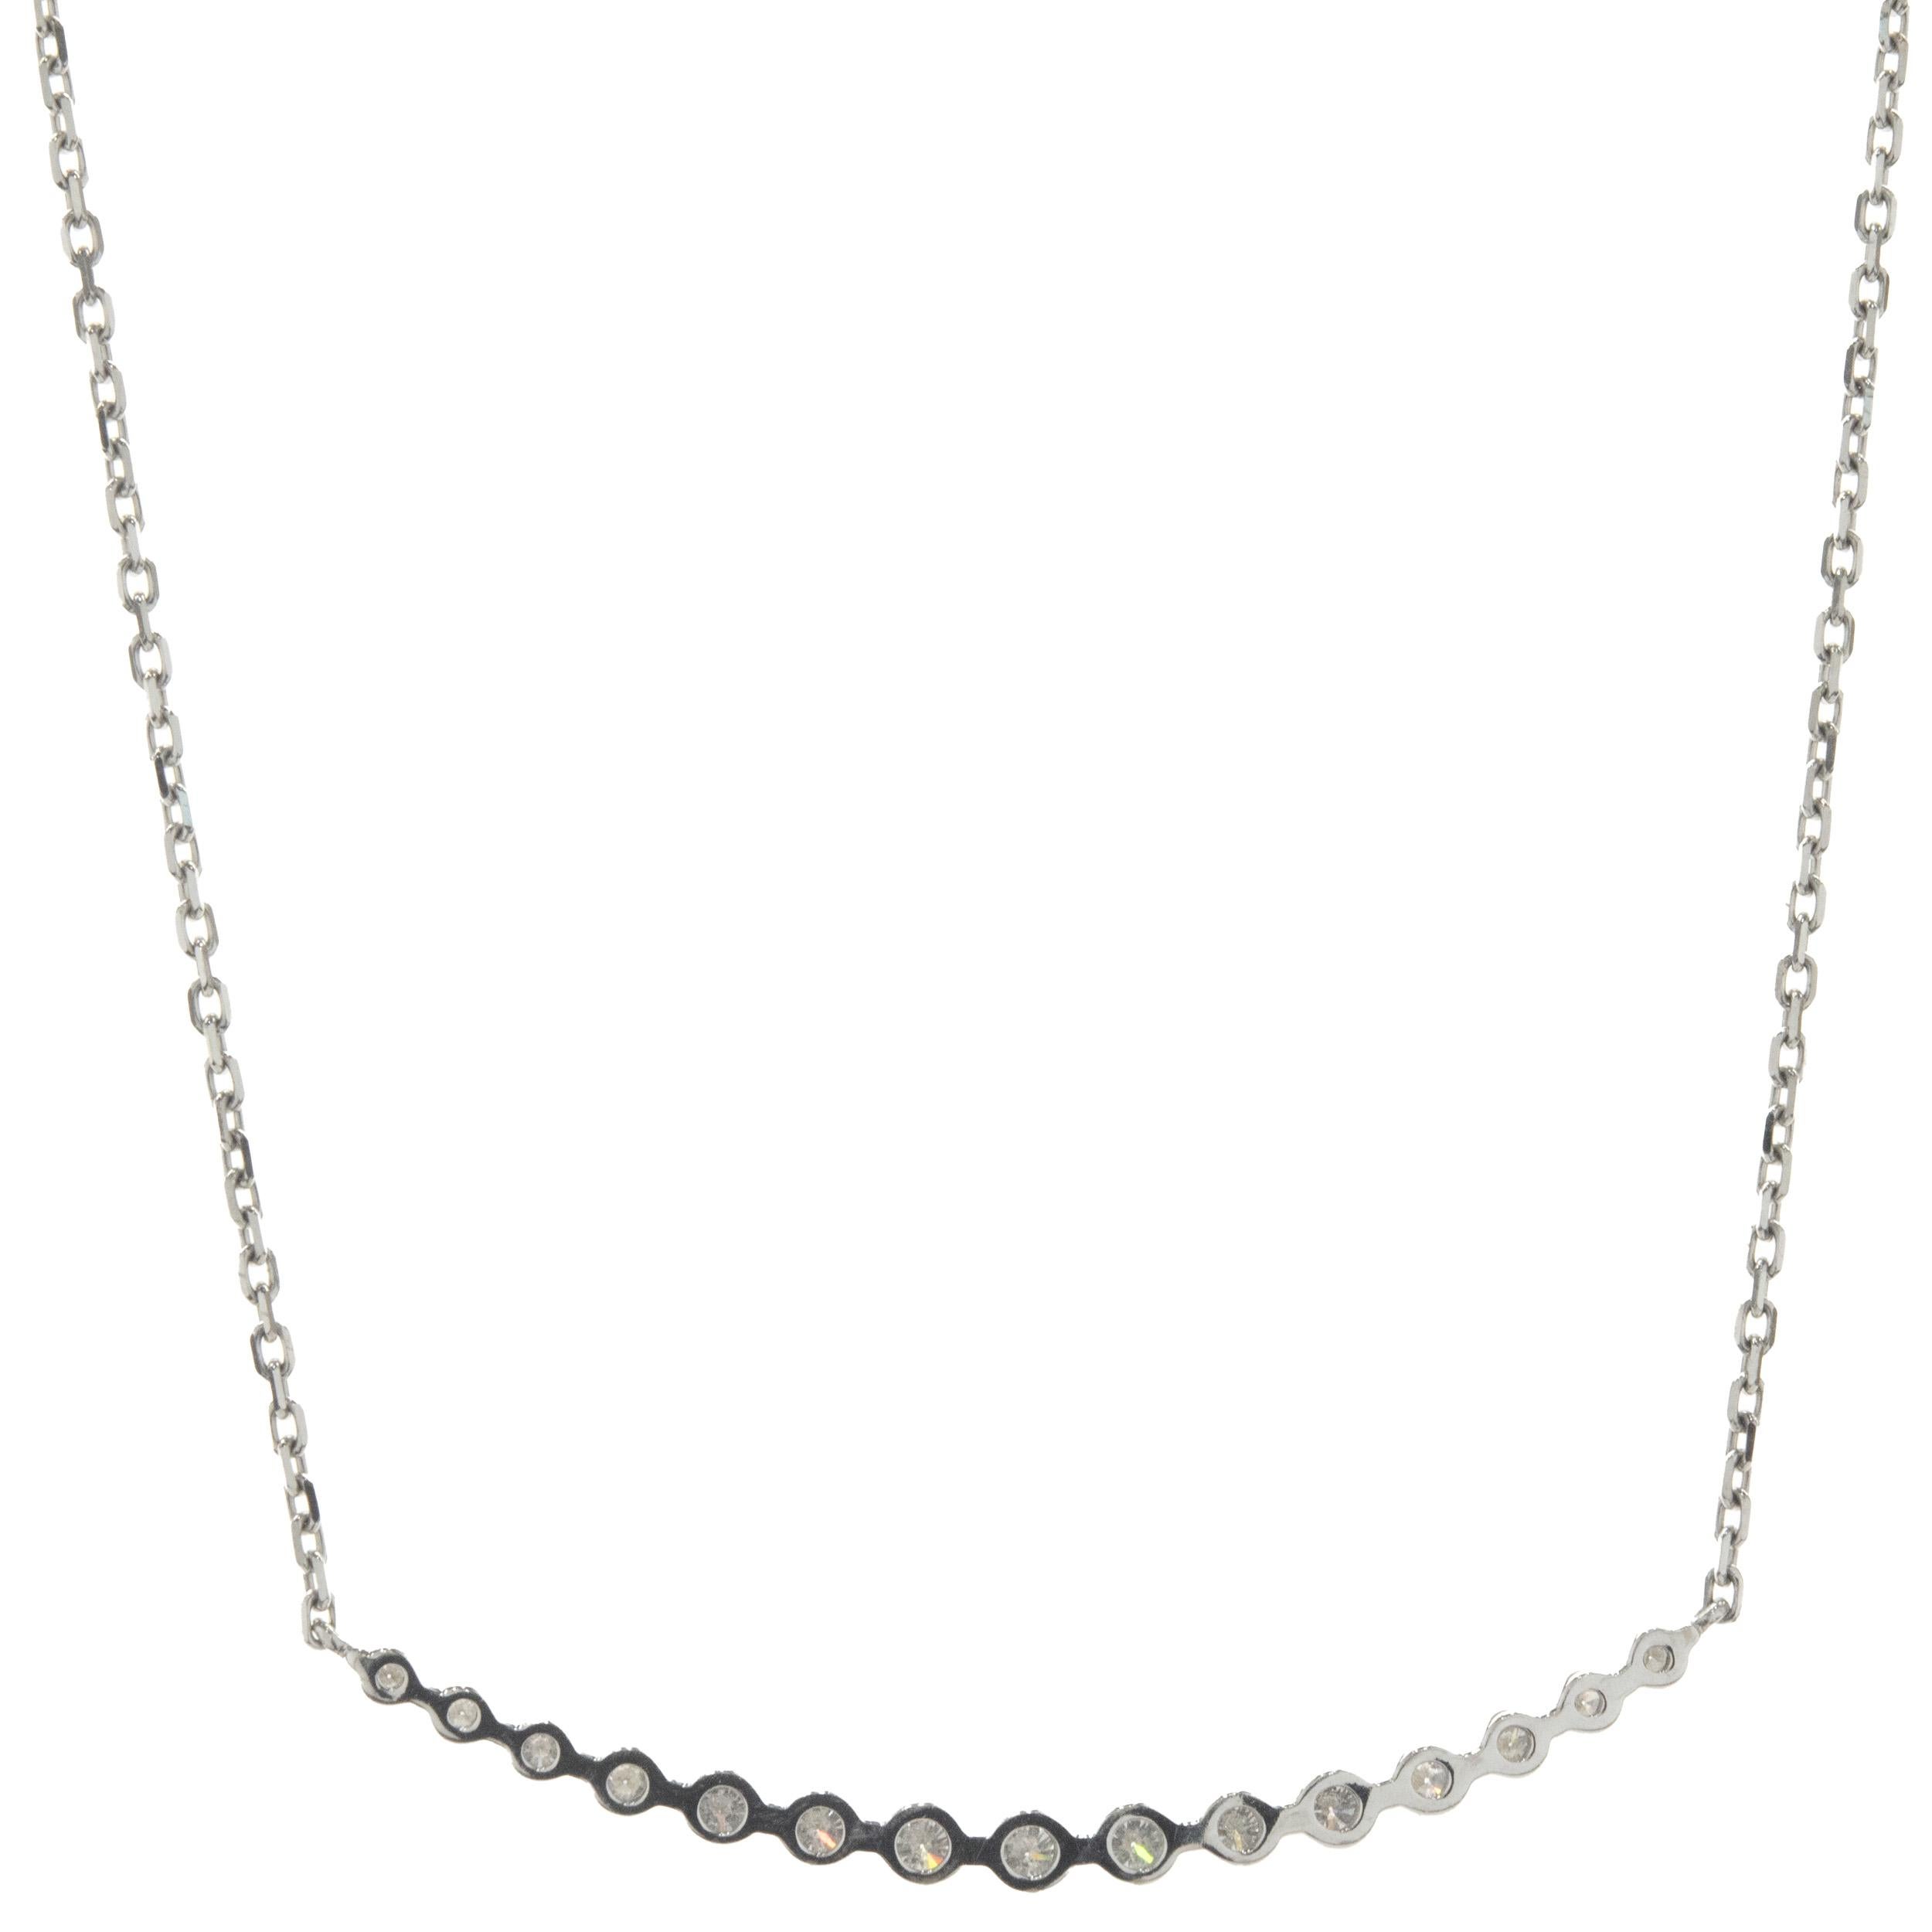 Designer: custom design
Material: 14K white gold
Diamond: round brilliant cut = 0.87cttw
Color: G
Clarity: SI1
Dimensions: necklace measures 18-inches in length 
Weight: 3.96 grams